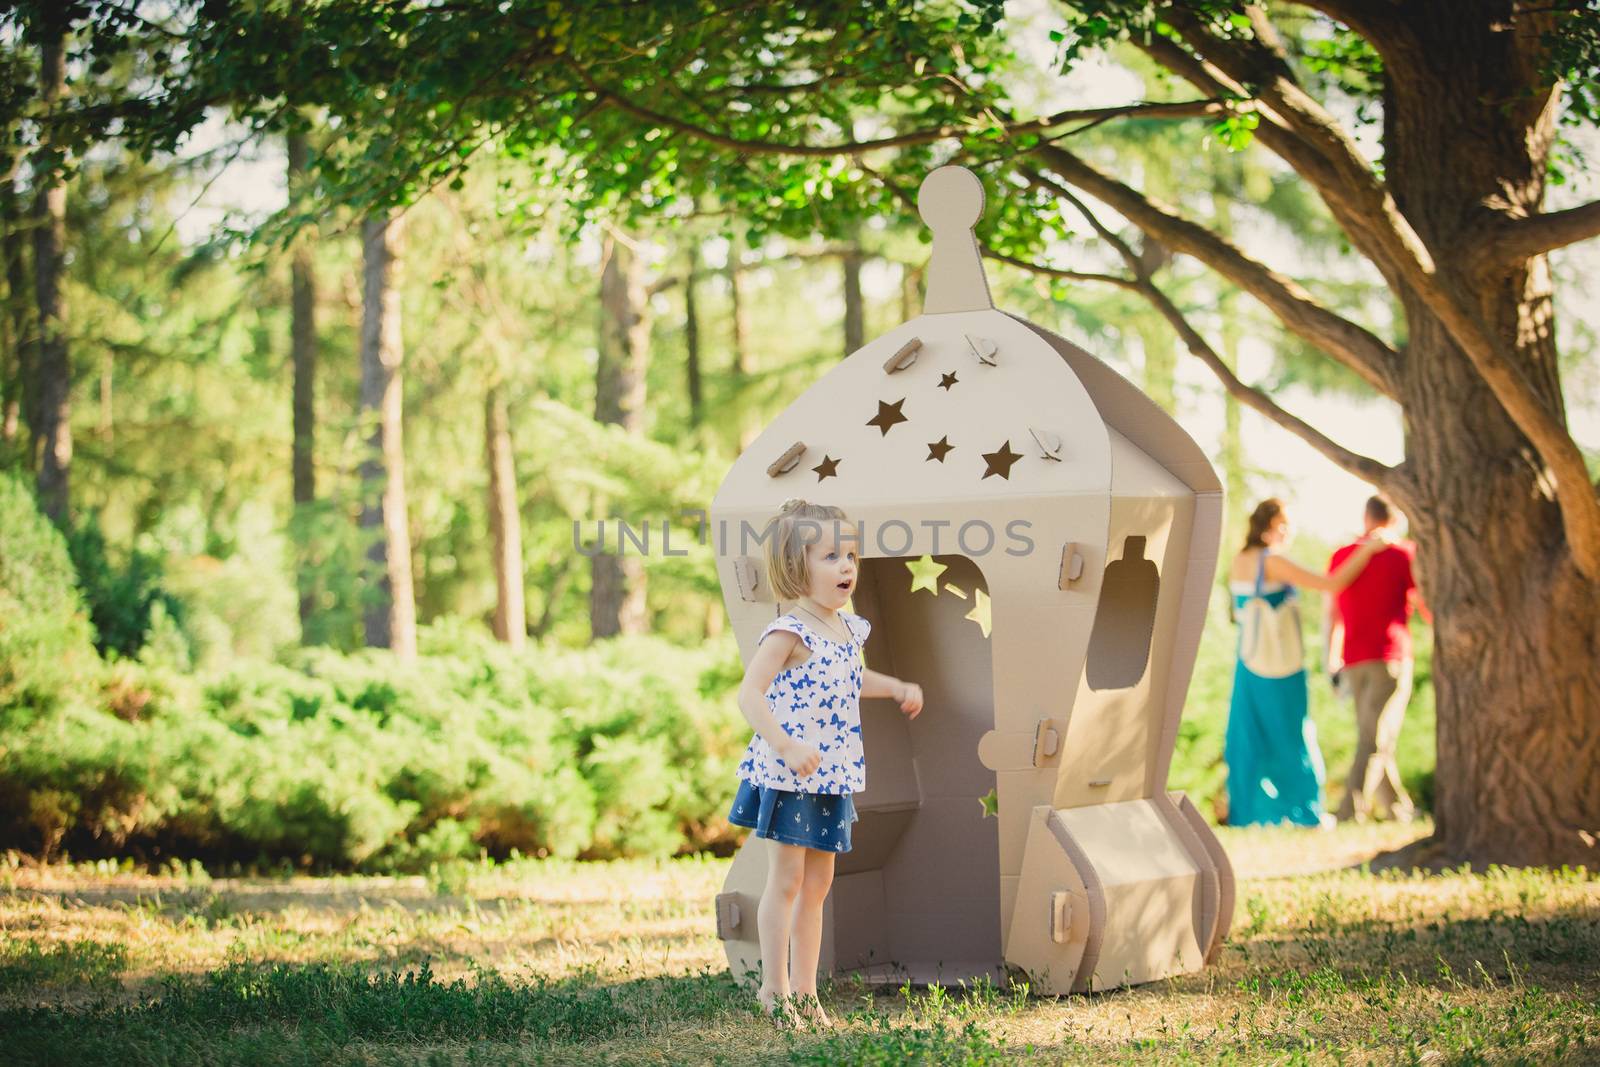 girl playing in cardboard spaceship in a city park on a sunny day